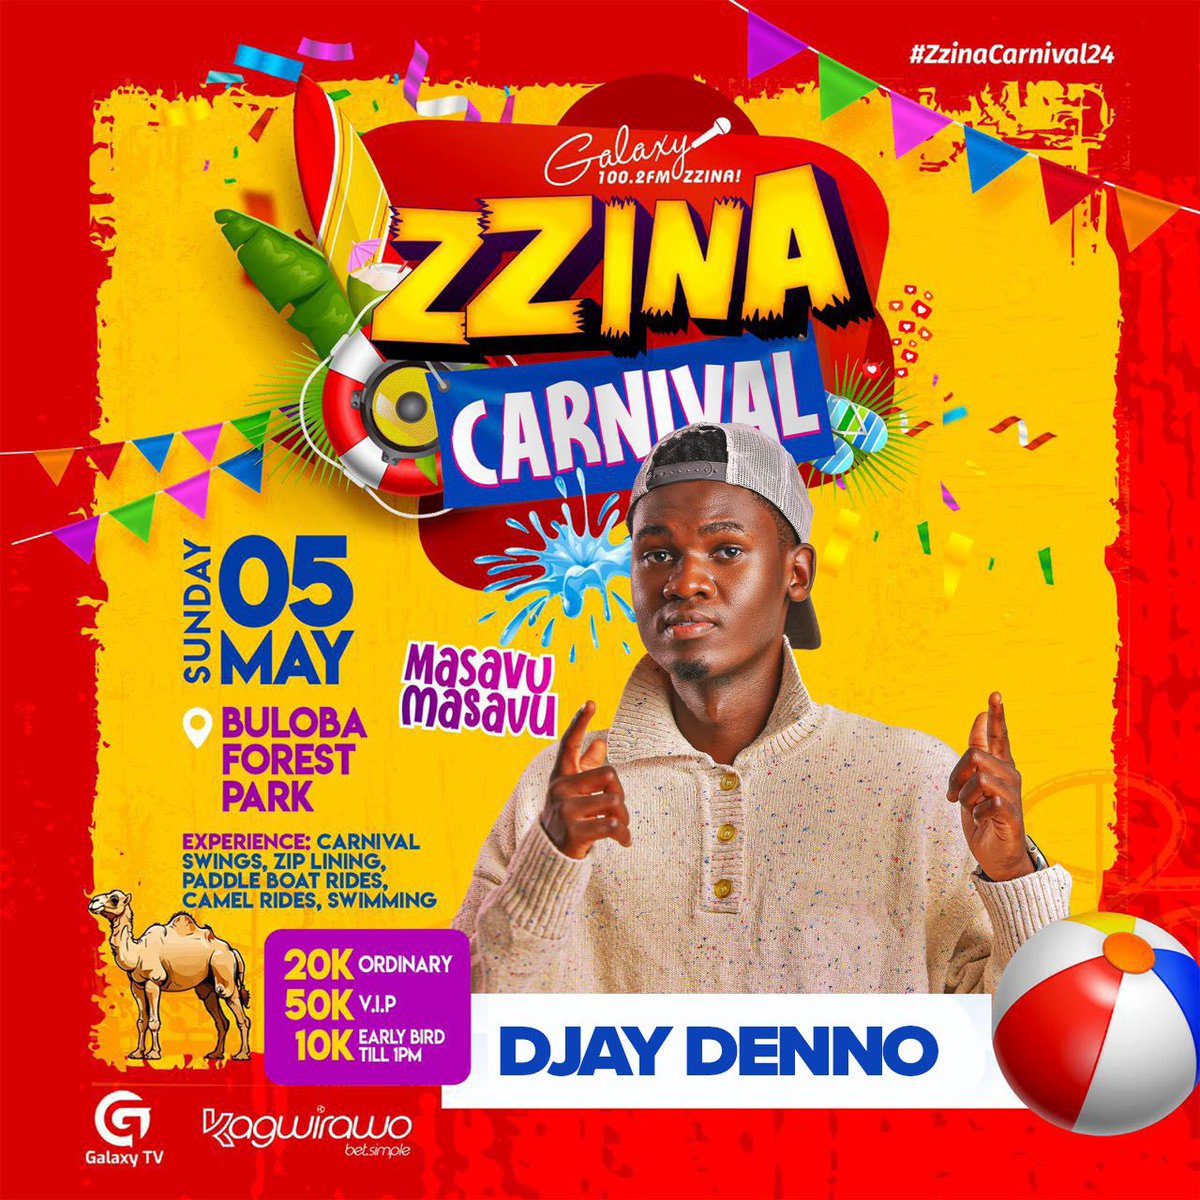 #zzinacarnival24 is happening today everything masavu 🔥